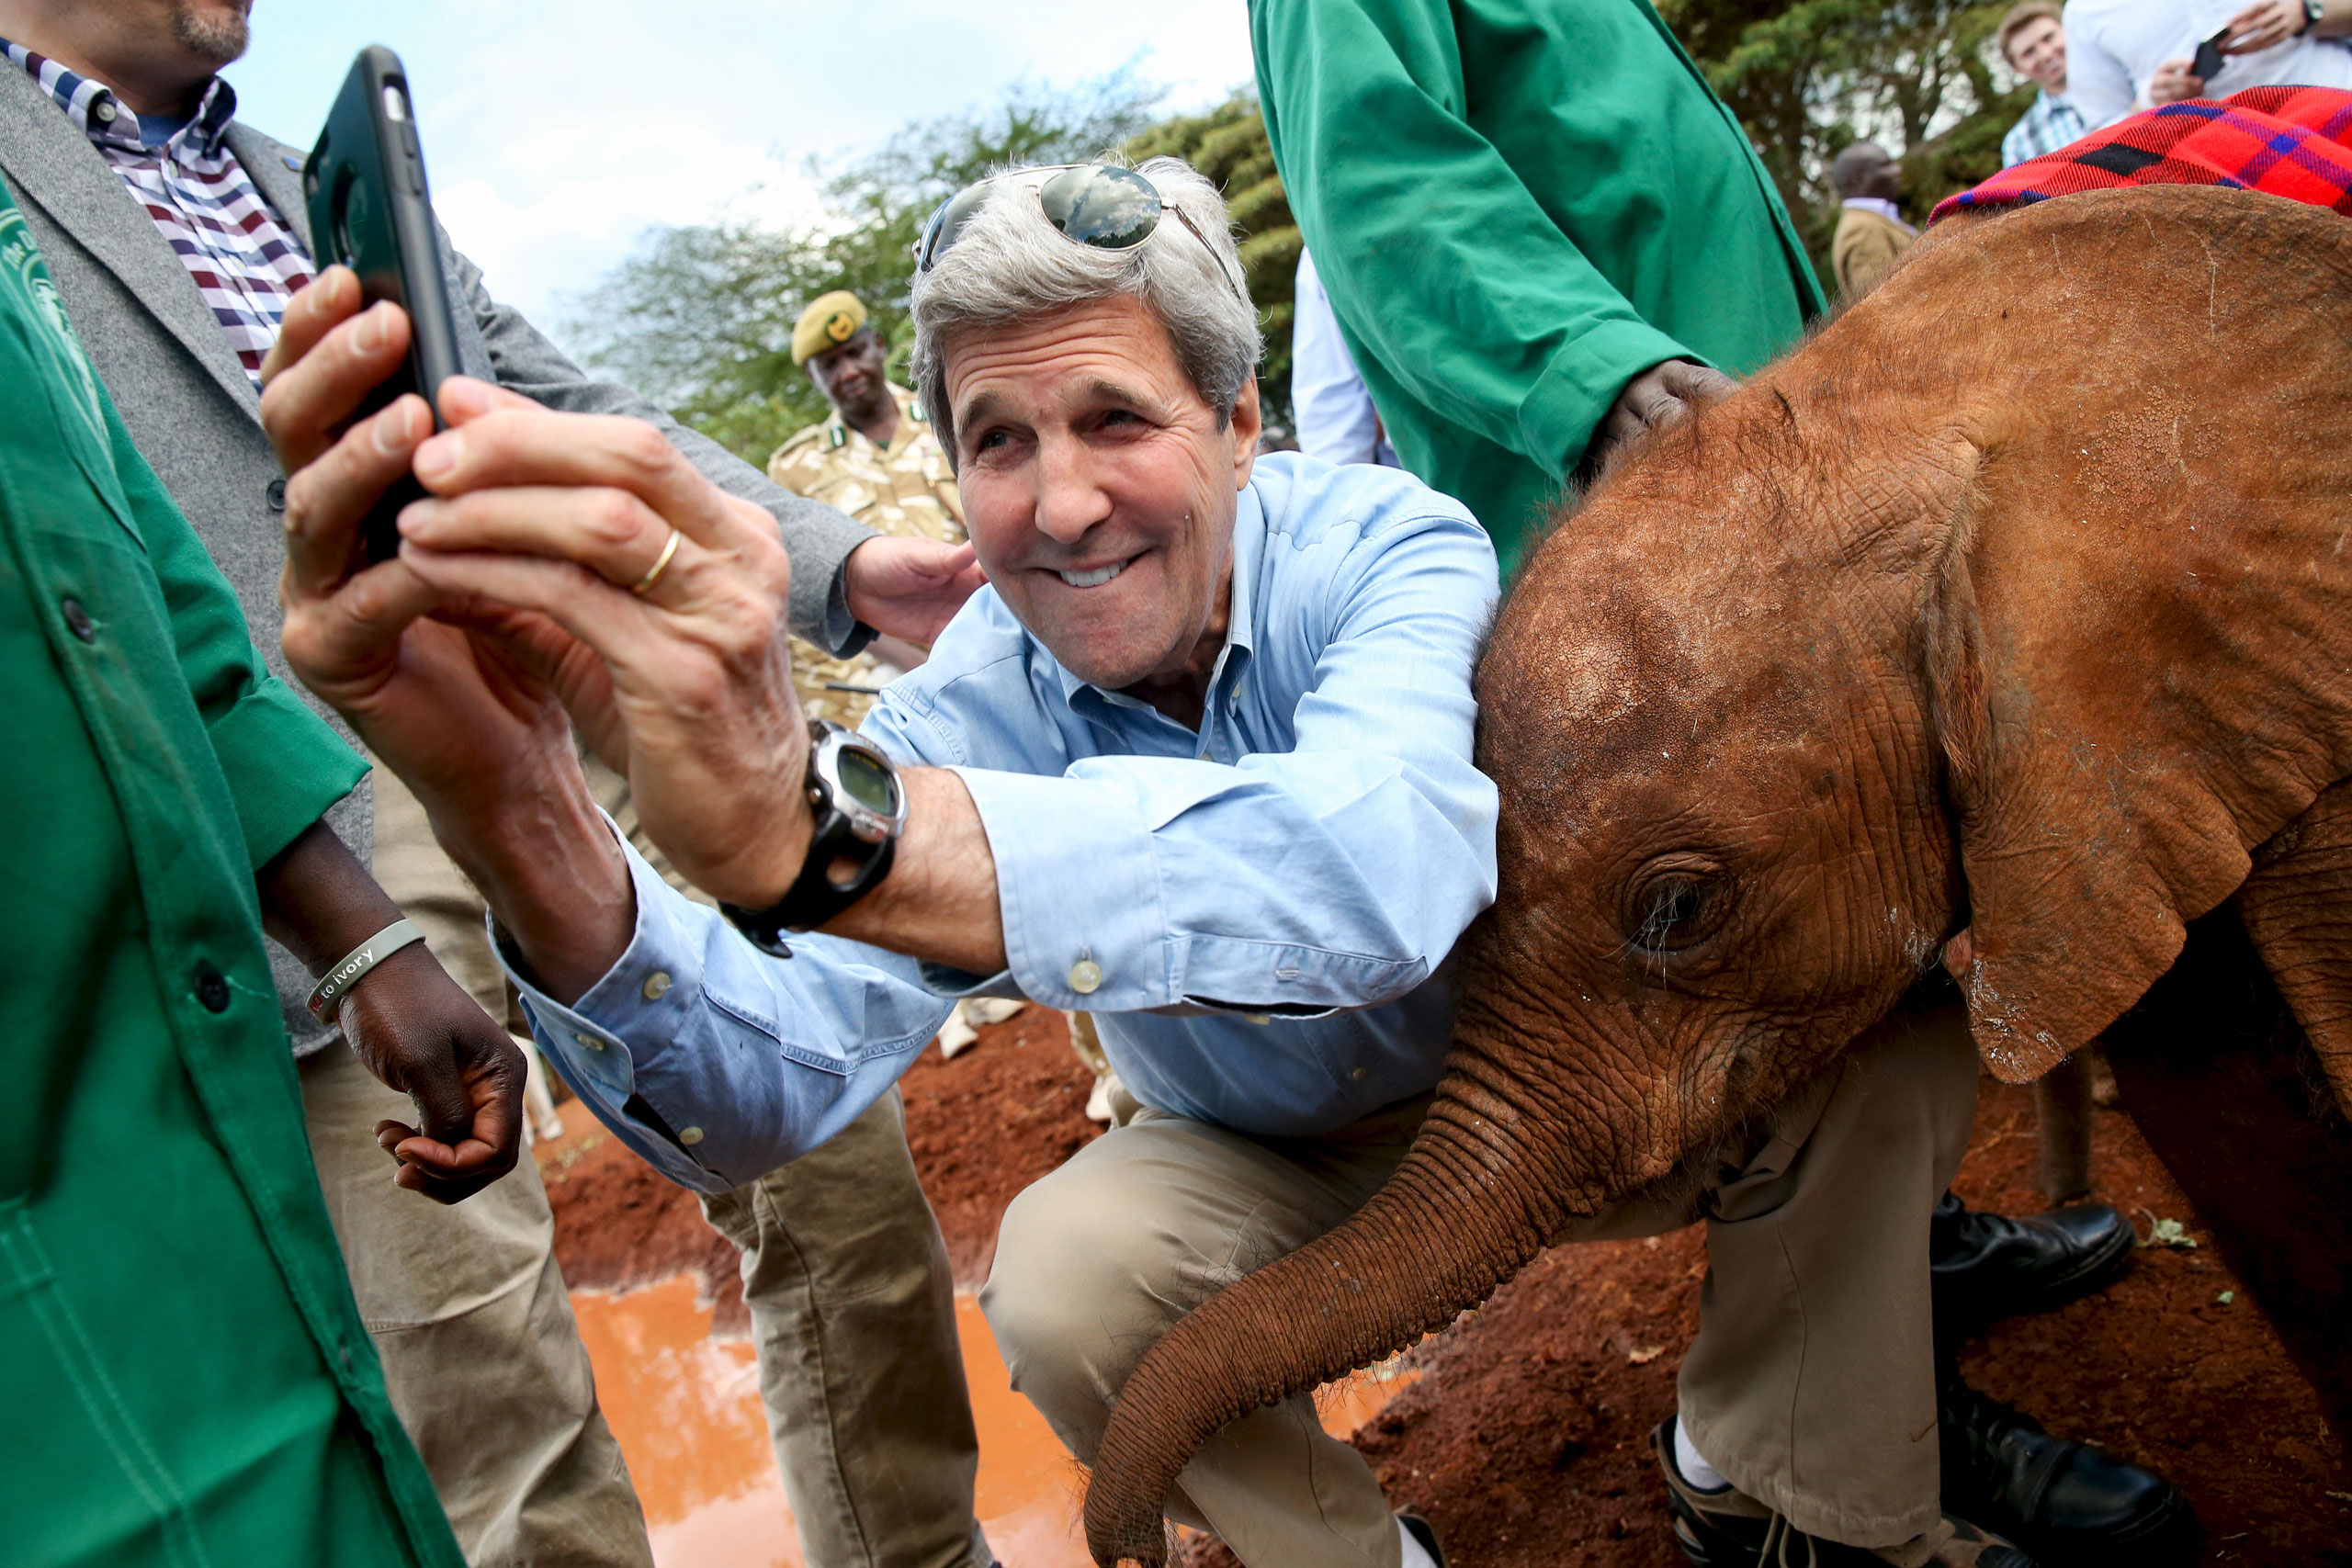 U.S. Secretary of State John Kerry takes a selfie with a baby elephant while touring the Sheldrick Center Elephant Orphanage at the Nairobi National Park, Kenya, May 3, 2015.